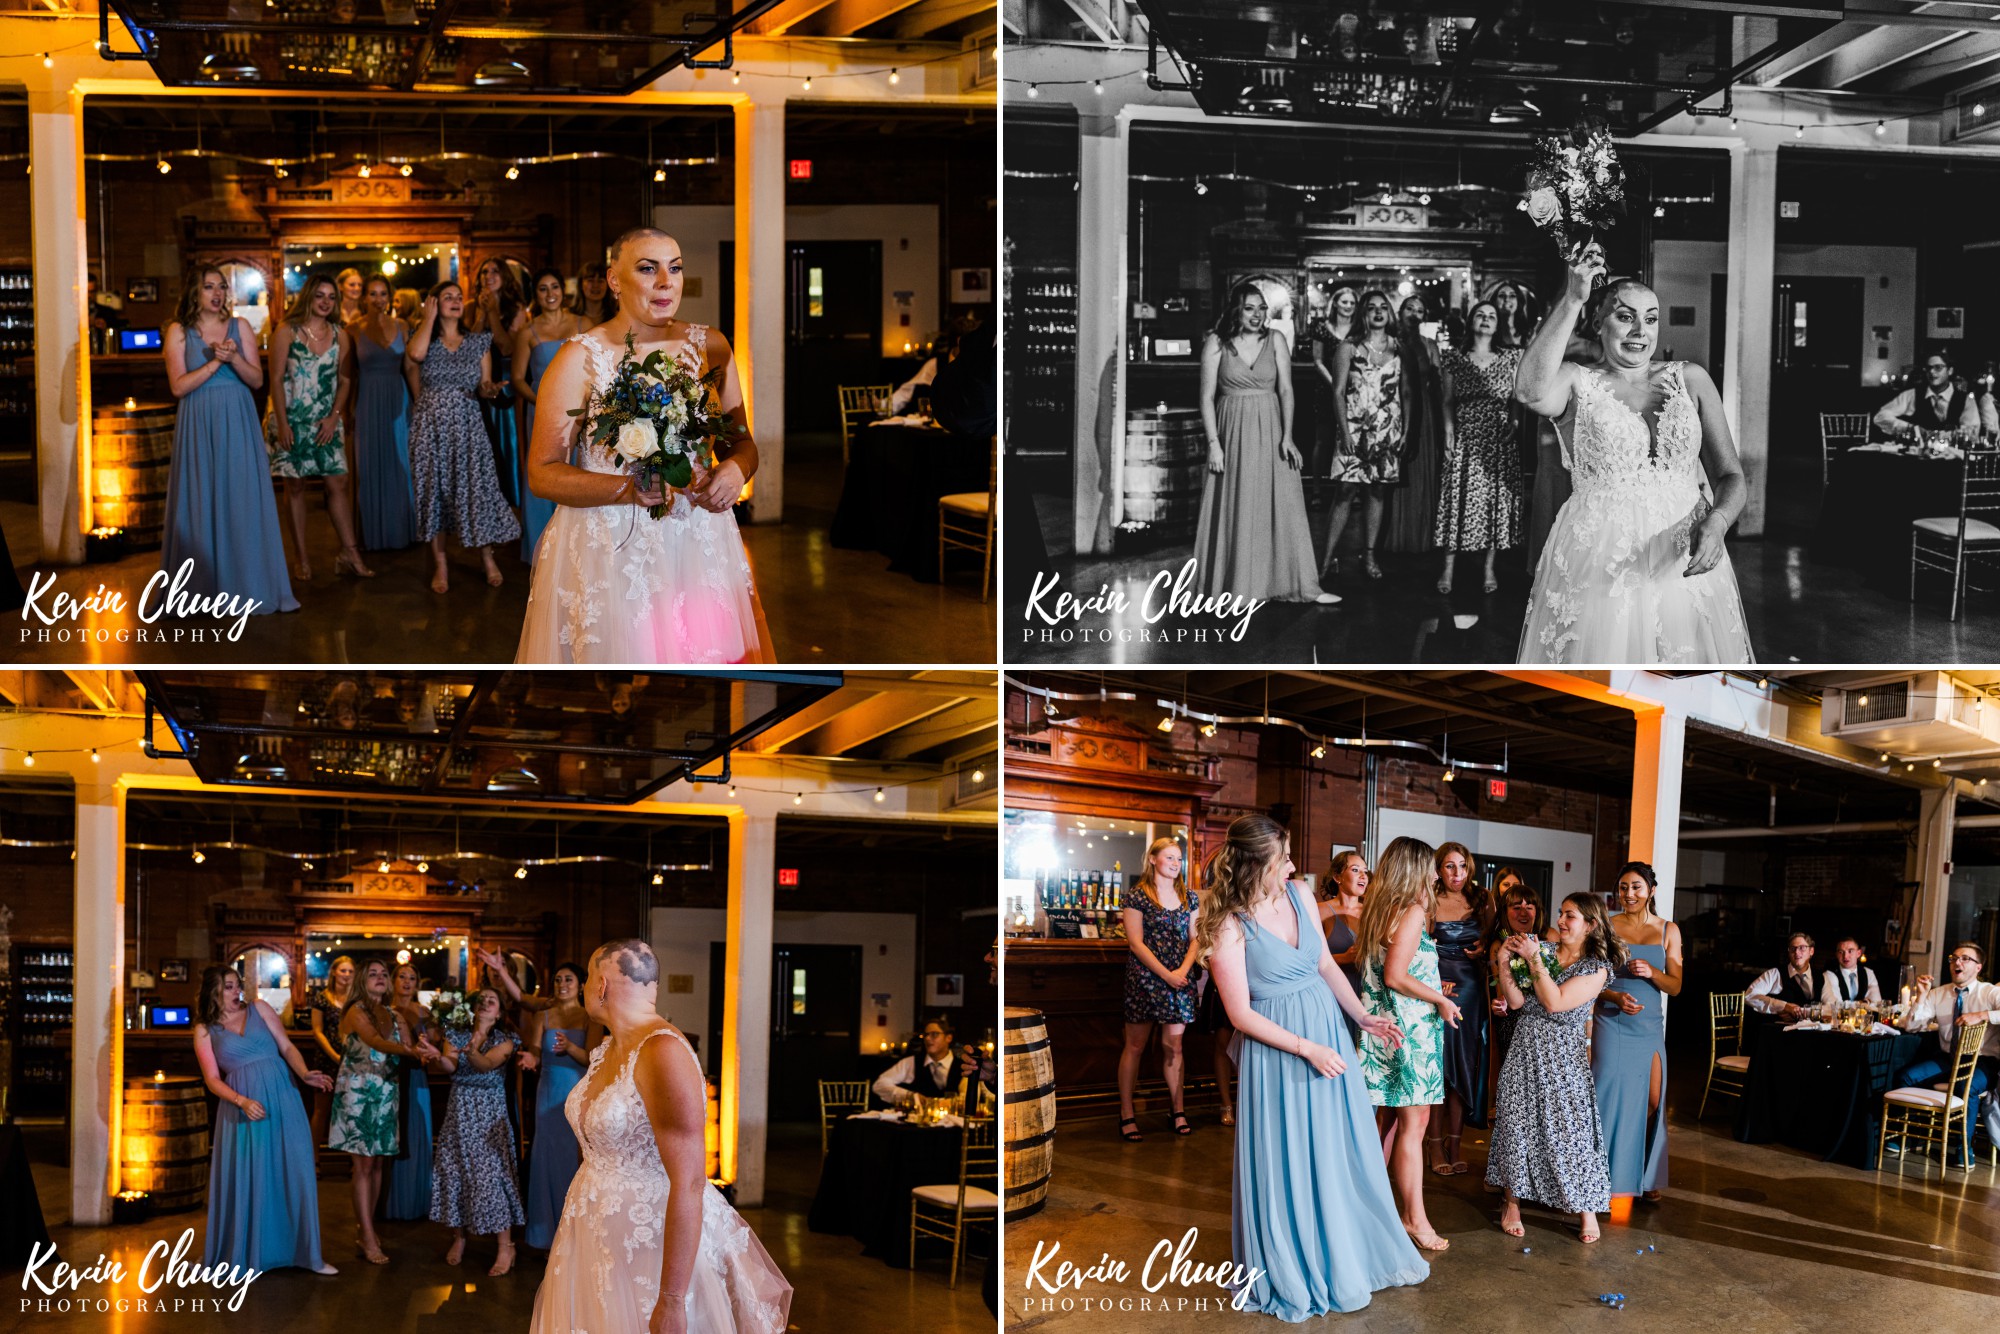 Great Lakes Brewing Company Tasting Room Wedding - Boquet Toss